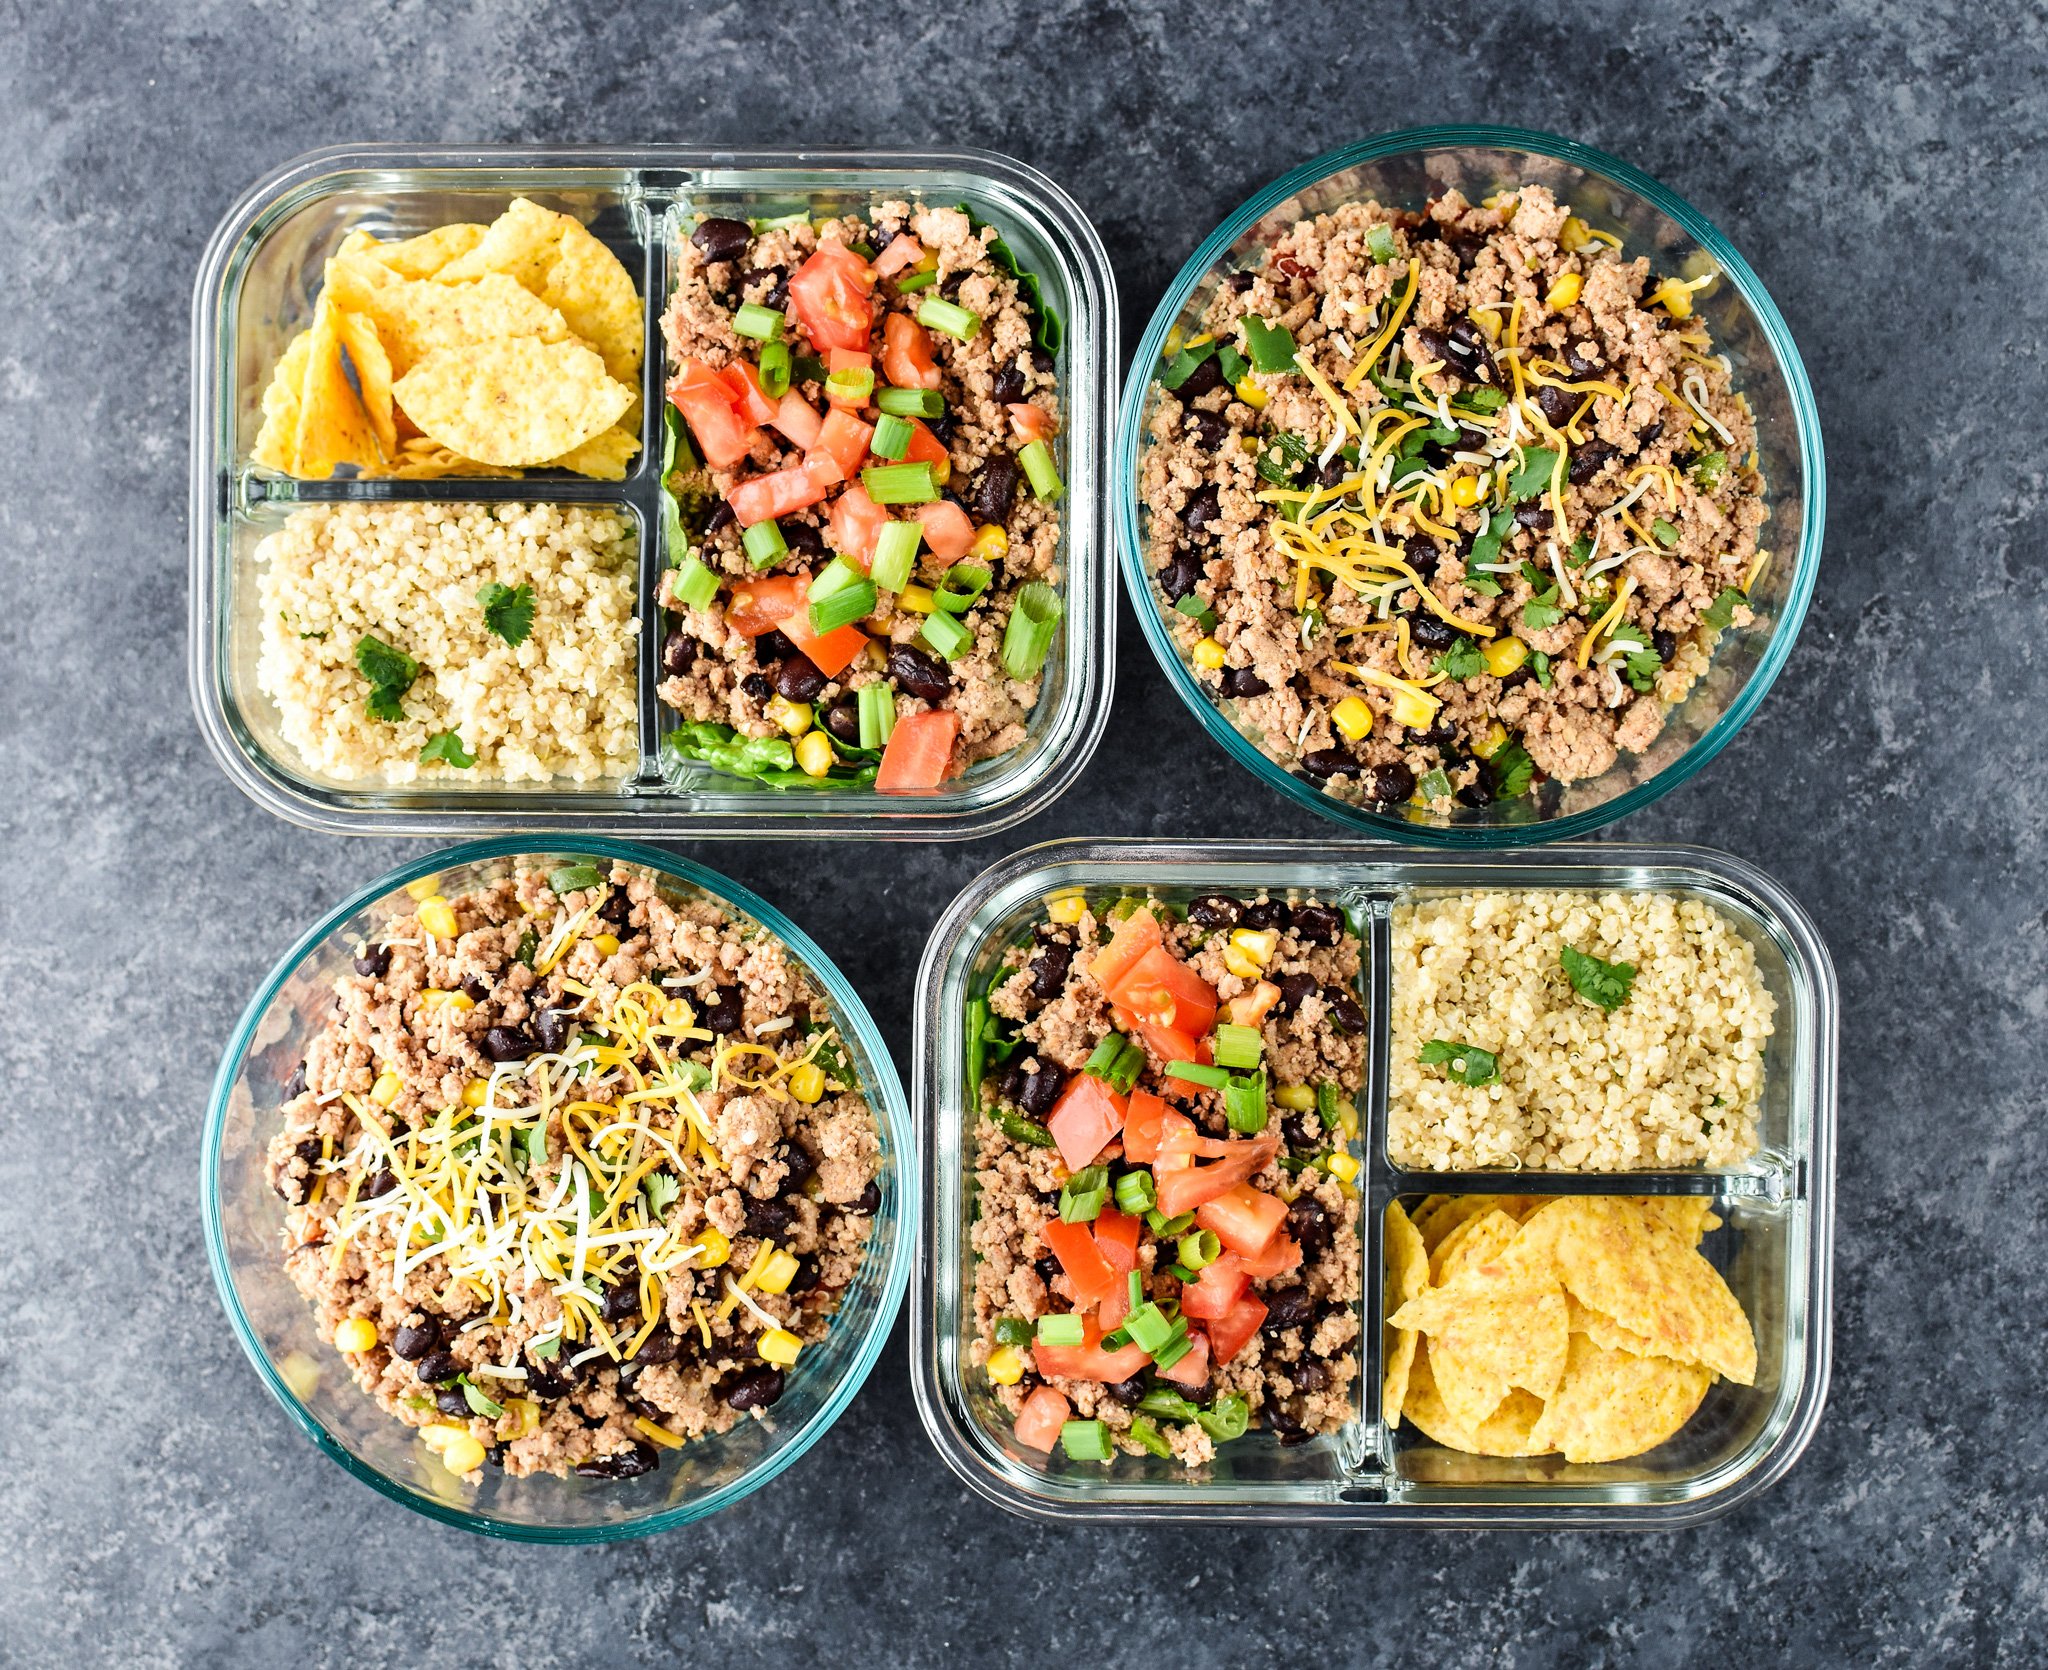 Hot & Cold Turkey Taco Meal Prep [+video!] - Project Meal Plan